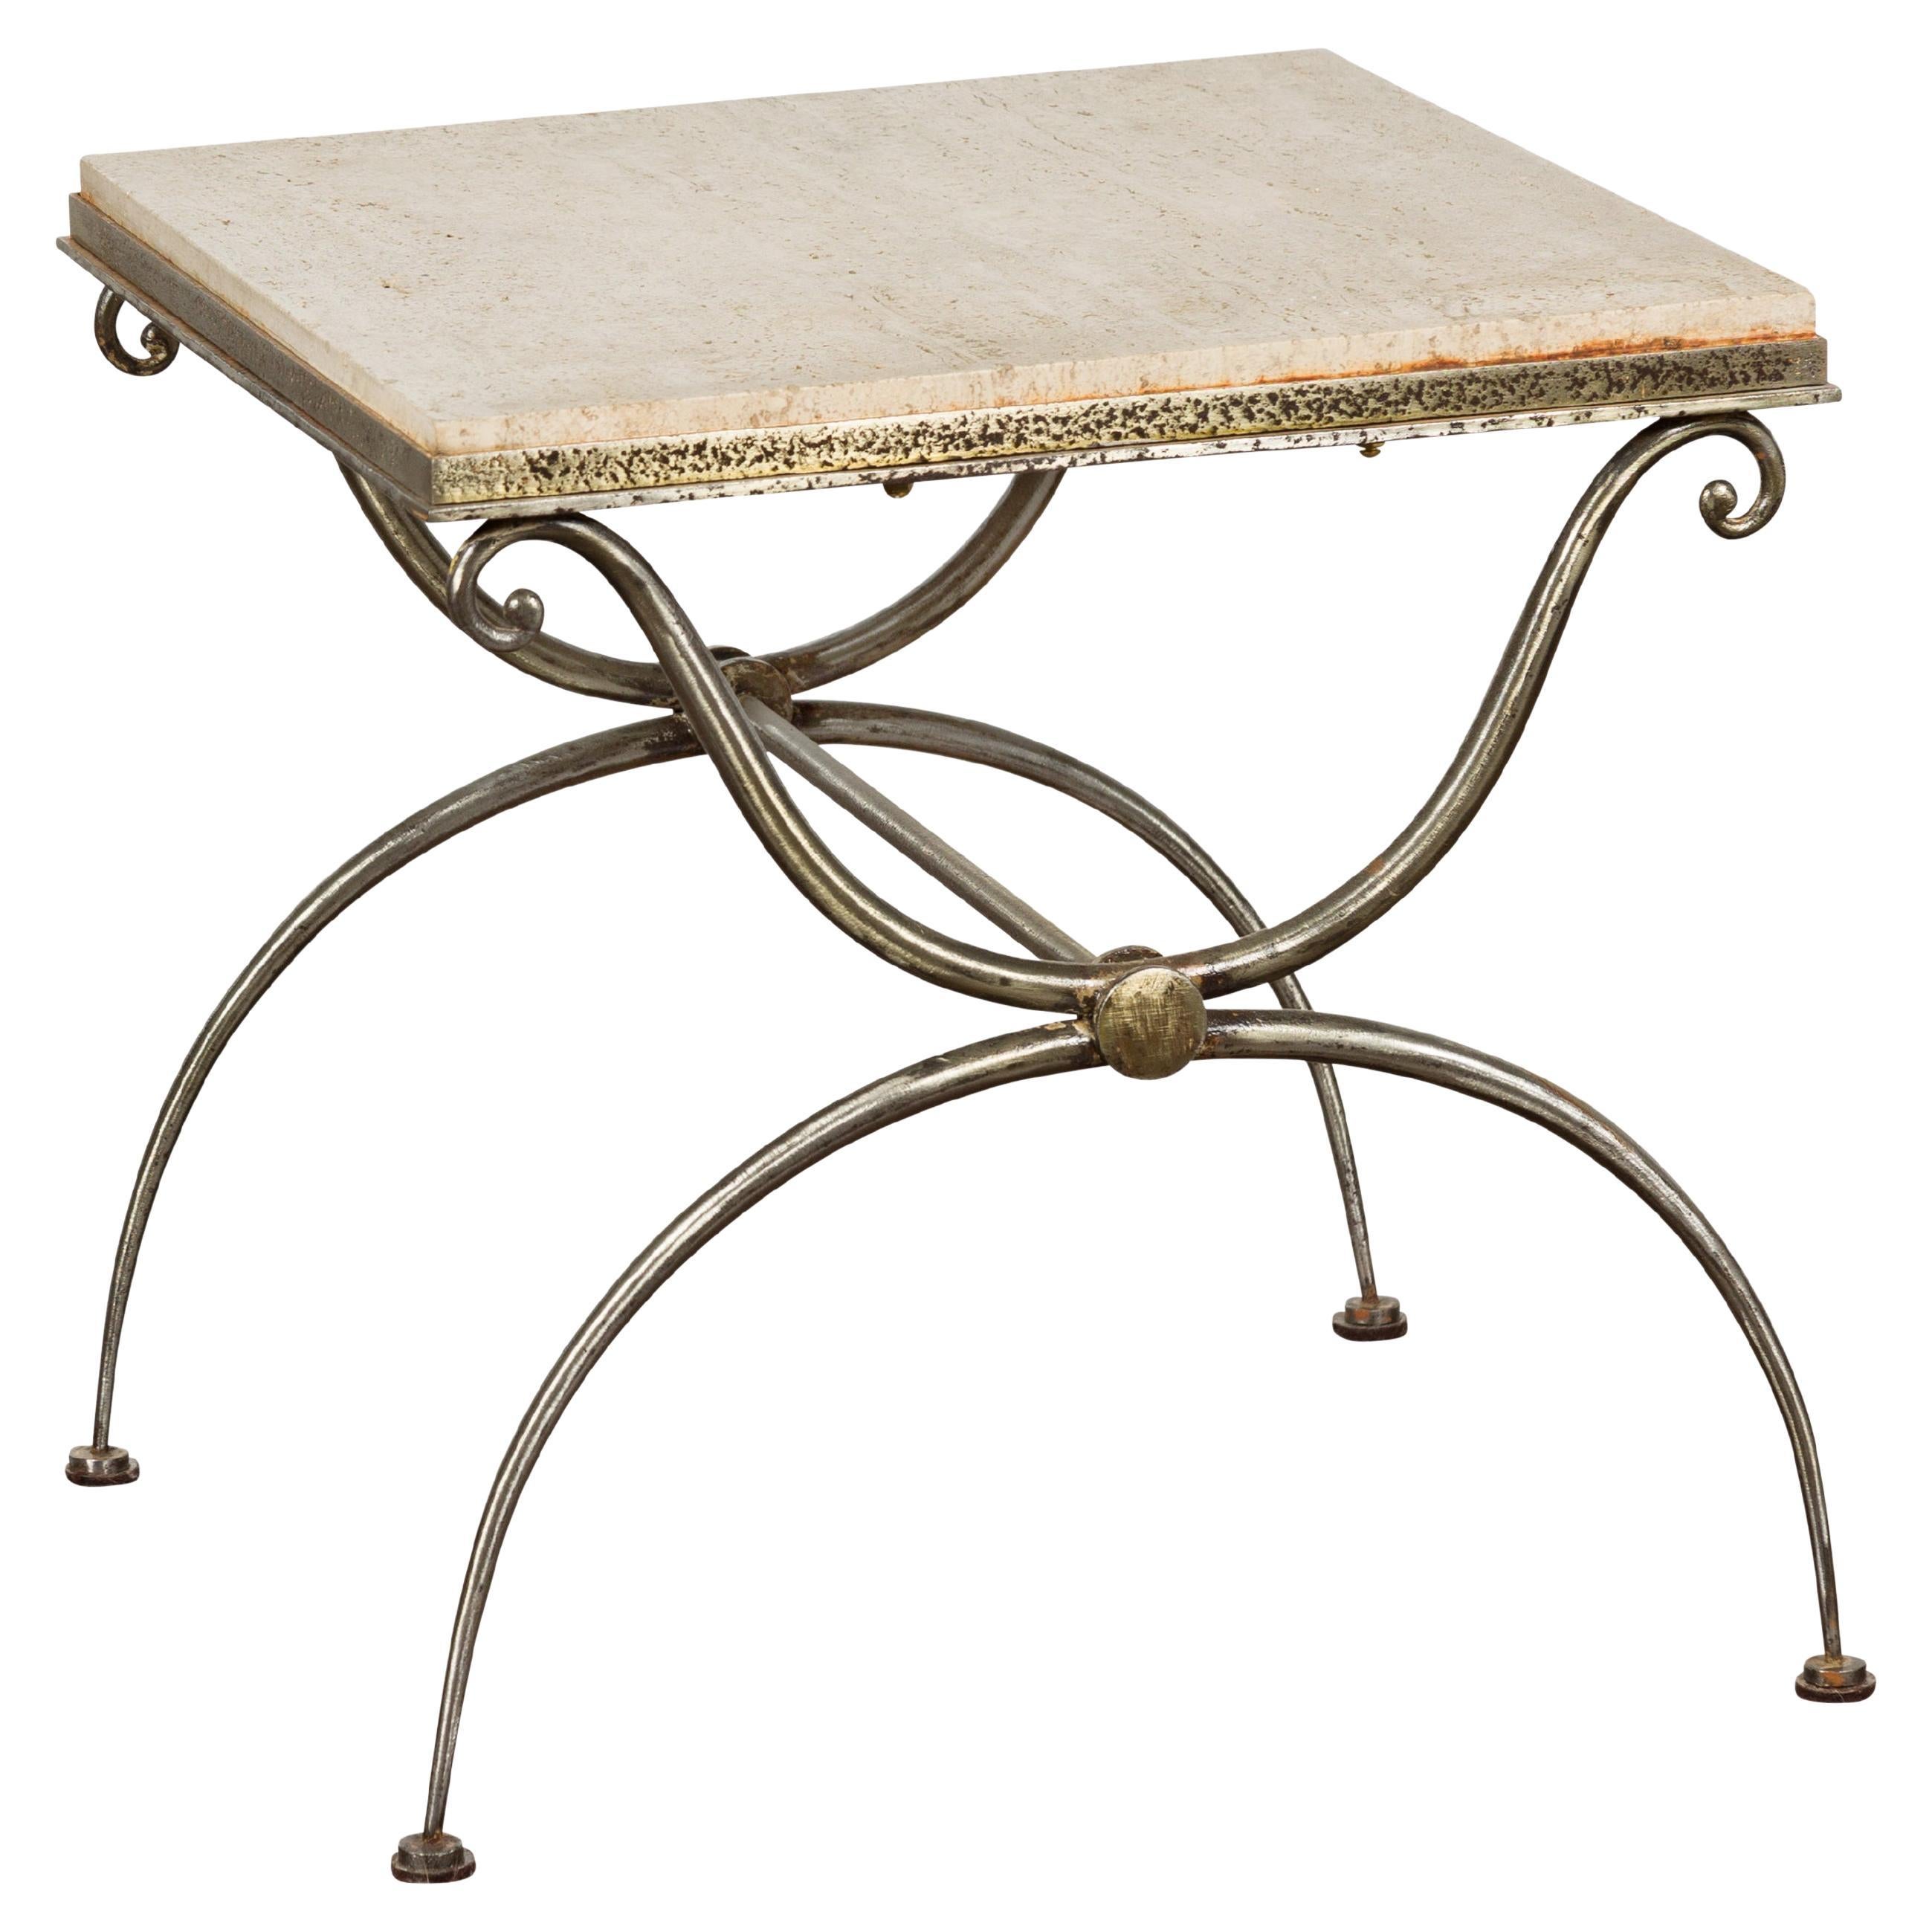 Midcentury French Steel Side Table with Marble Top and Scrolling Supports For Sale